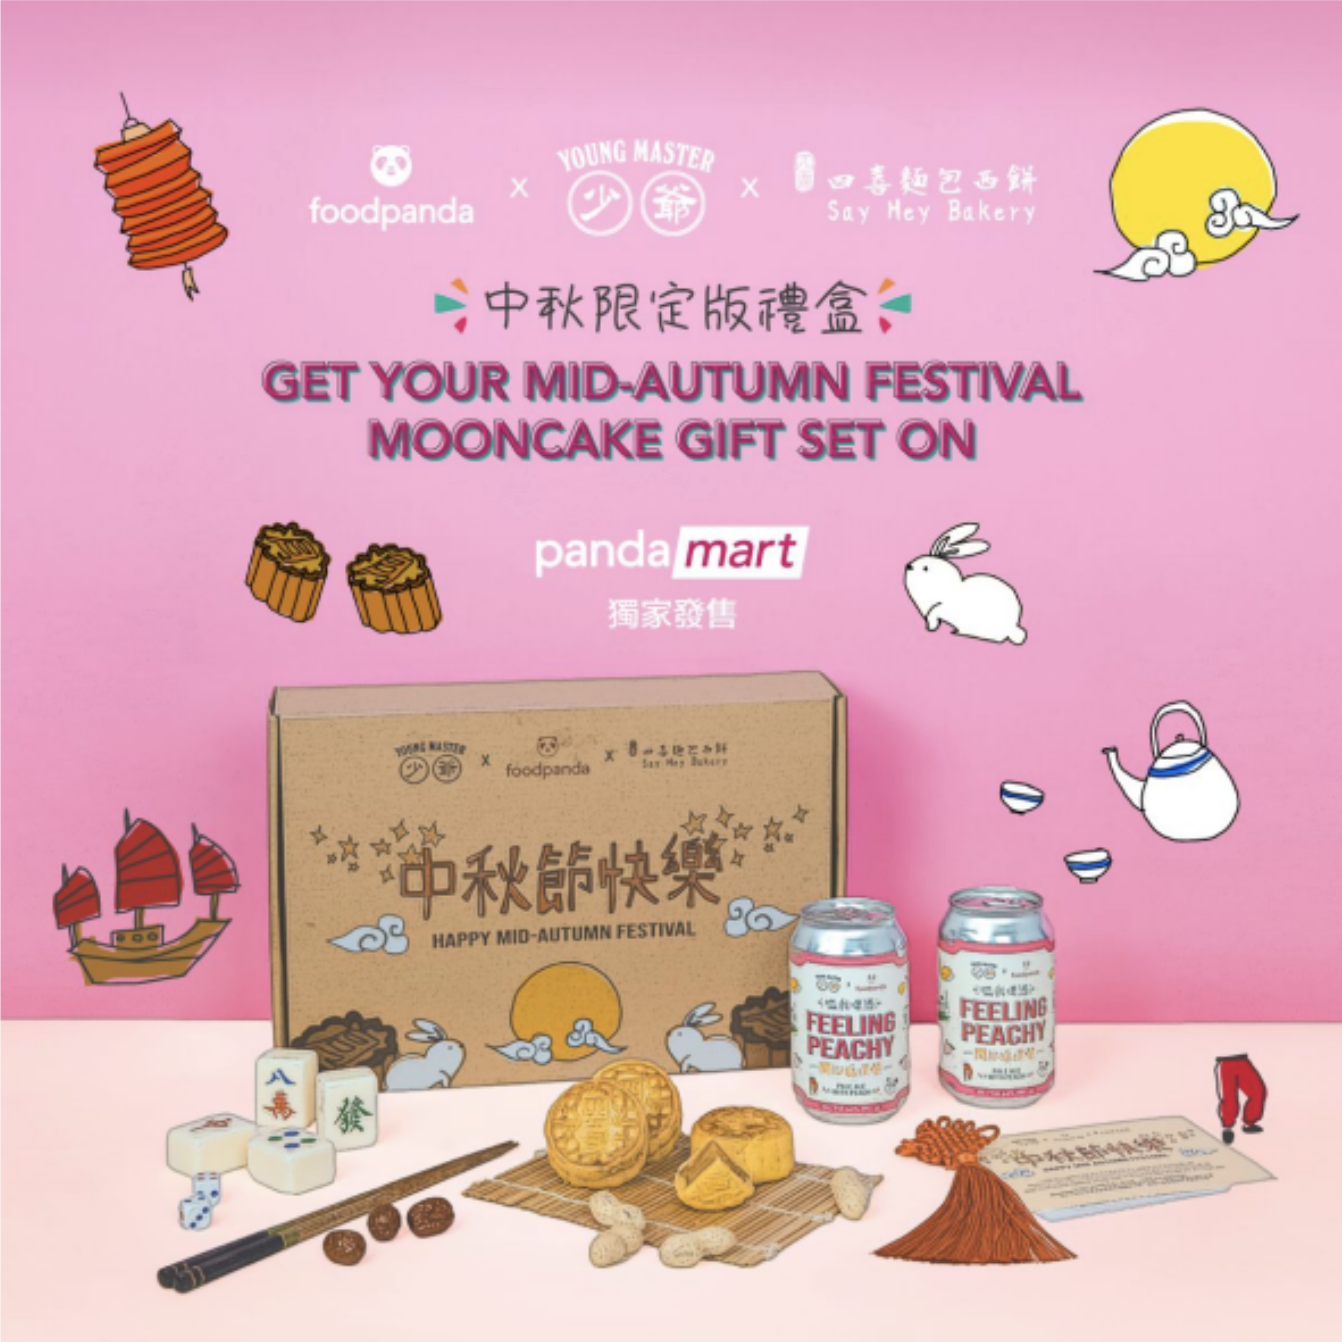 foodpanda Hong Kong collaborates with Young Master Brewery and Say Hey Bakery in celebration of Mid-Autumn Festival